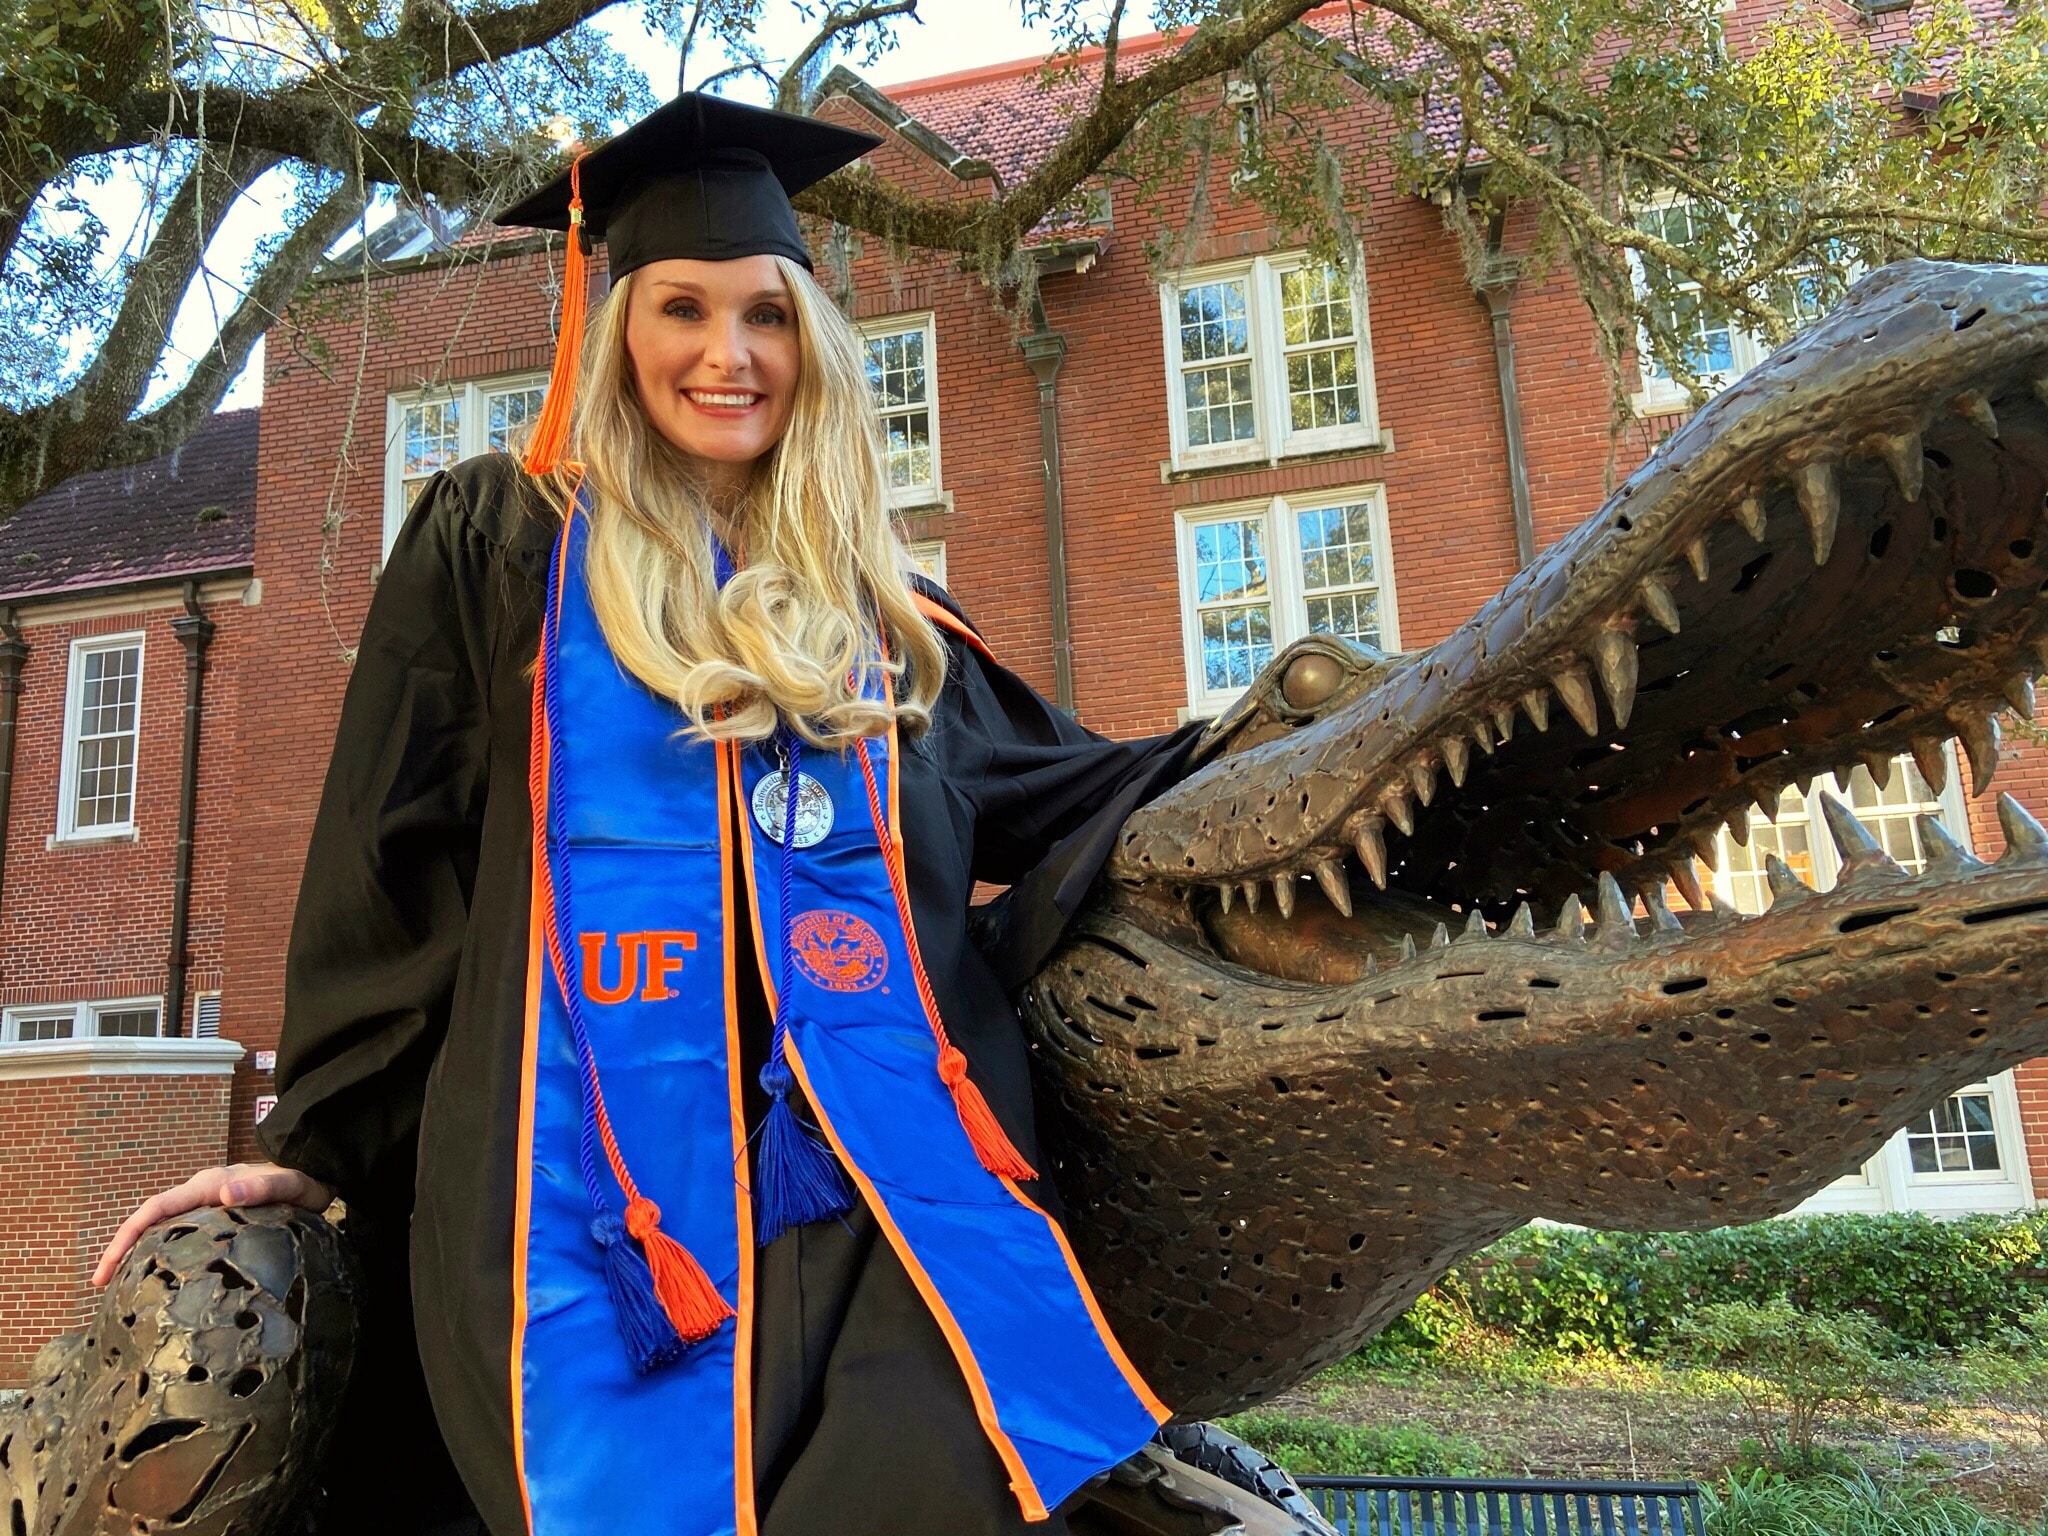 Katie Hudon wears a cap and gown with blue stole while sitting next to a large Gator statue.